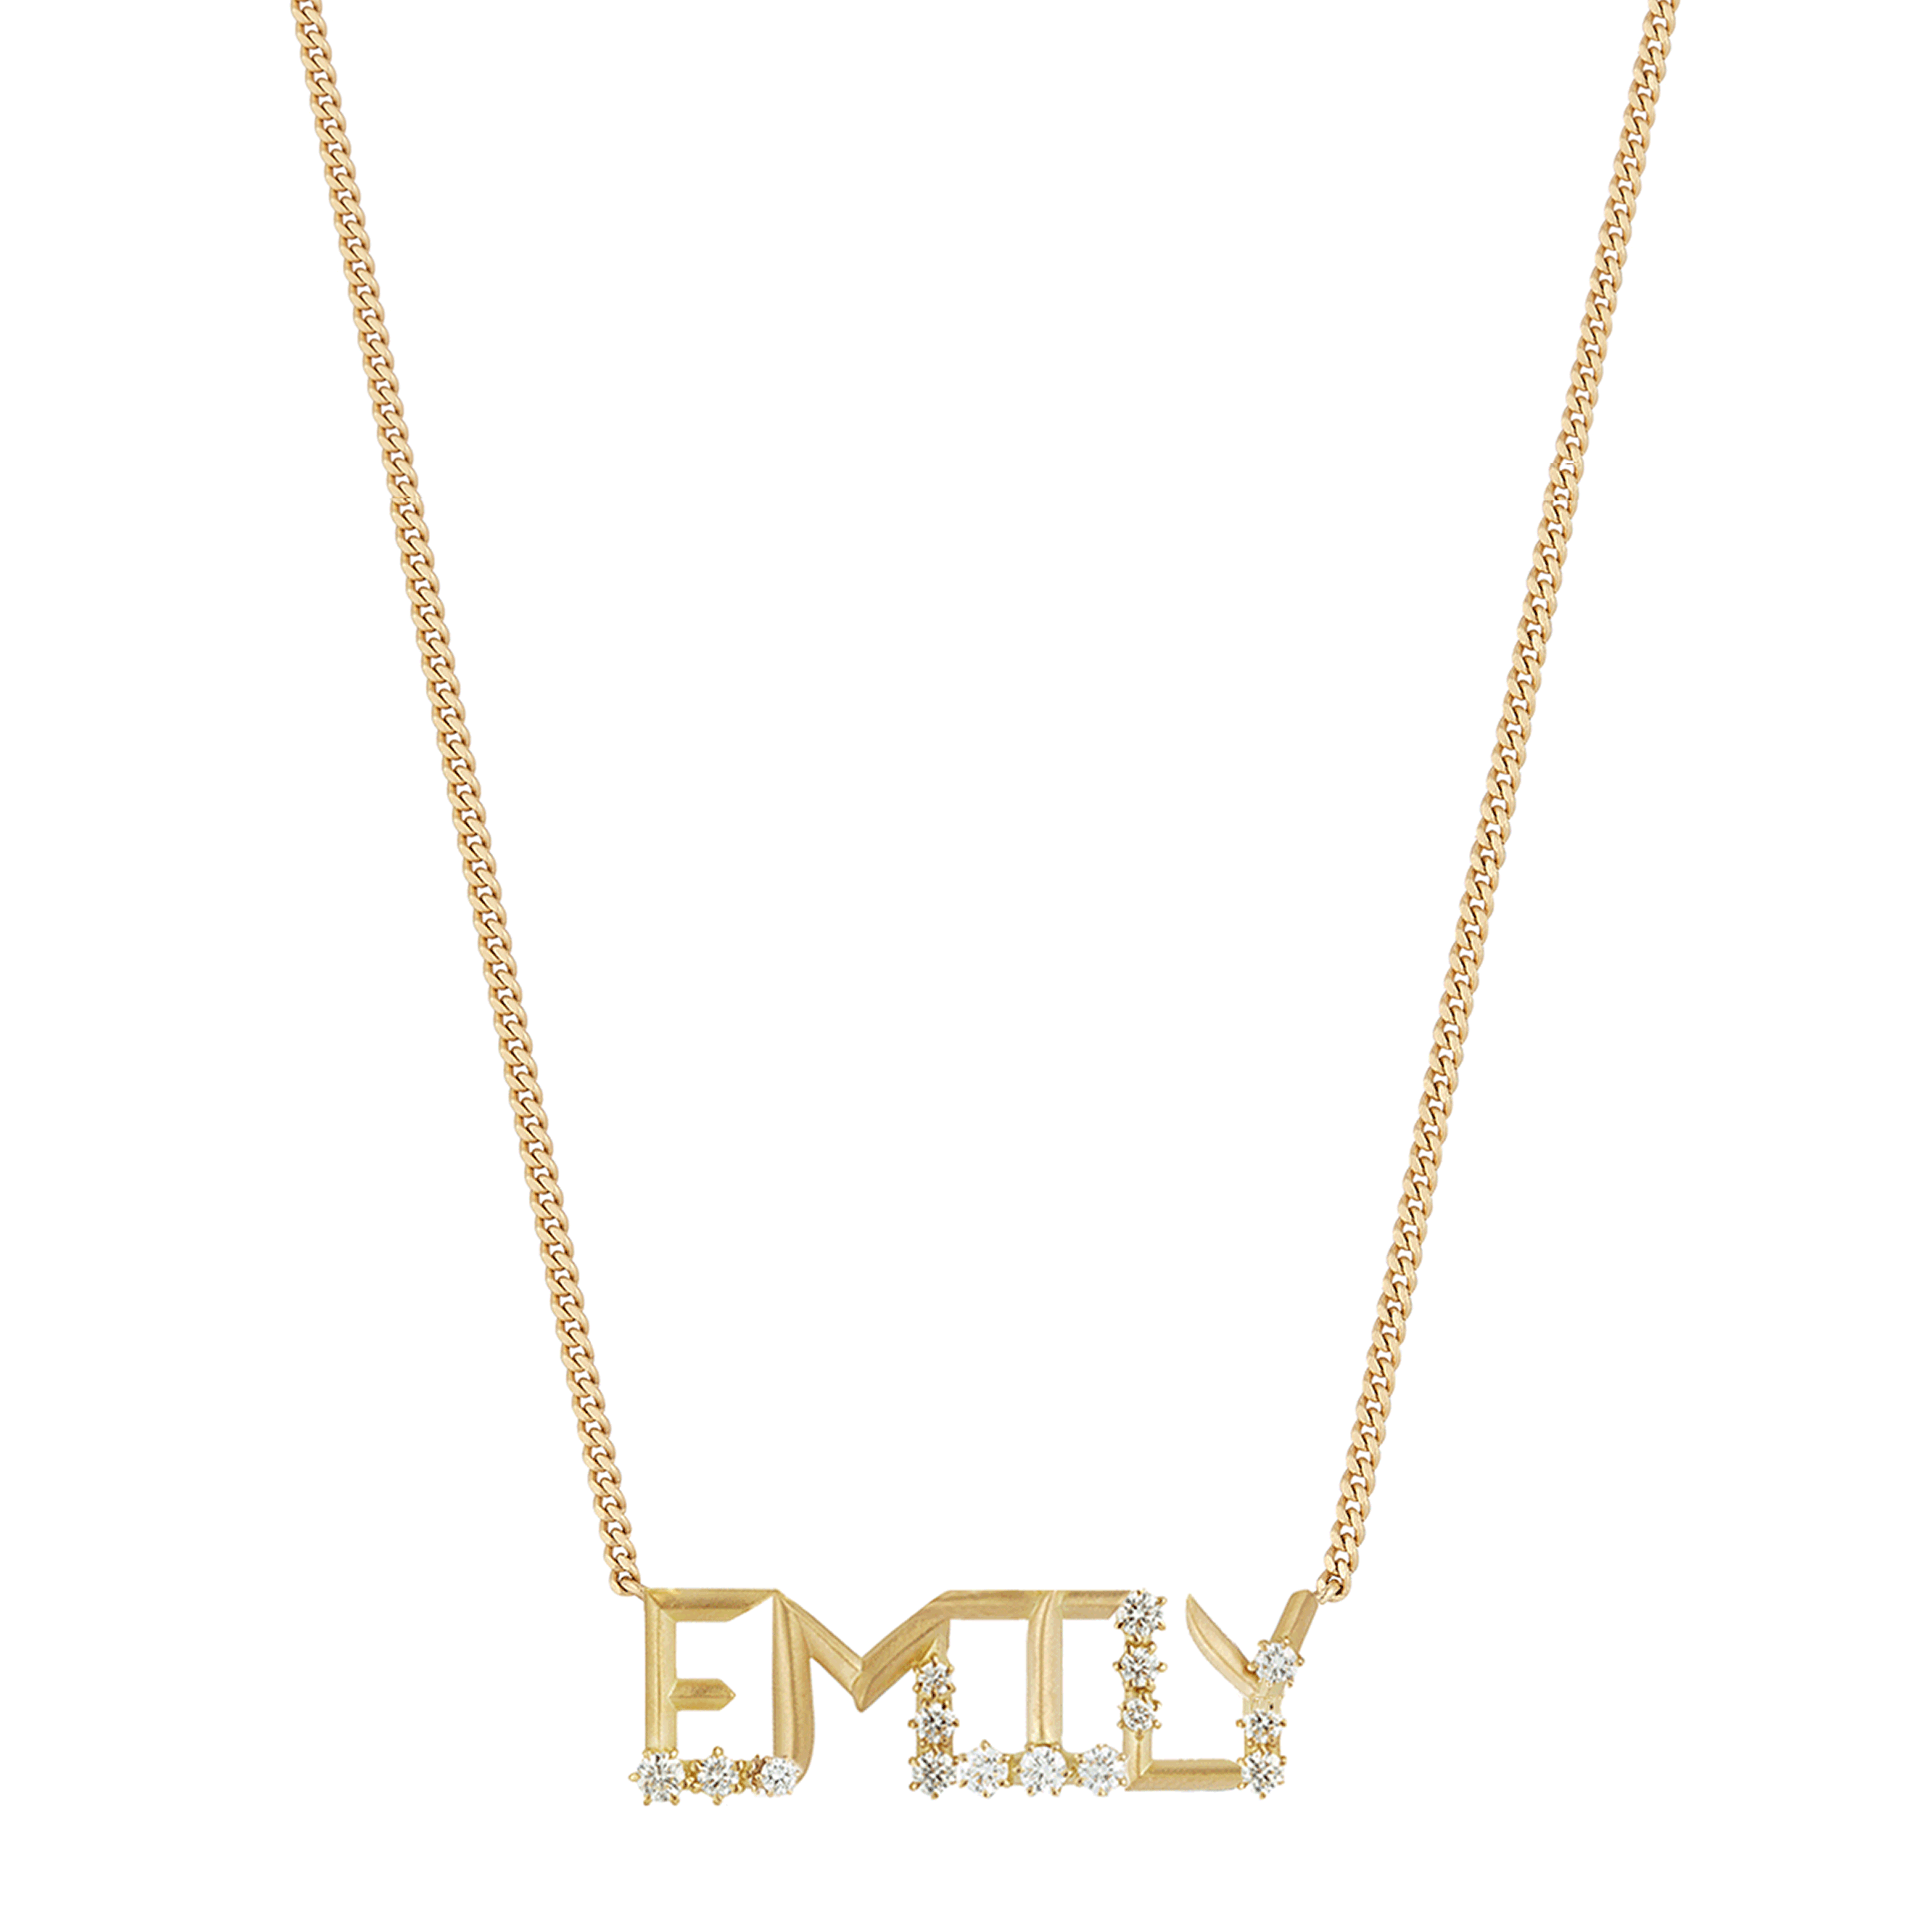 Replacement Chain for Nameplate Chain for name tag New Chain for Pendant